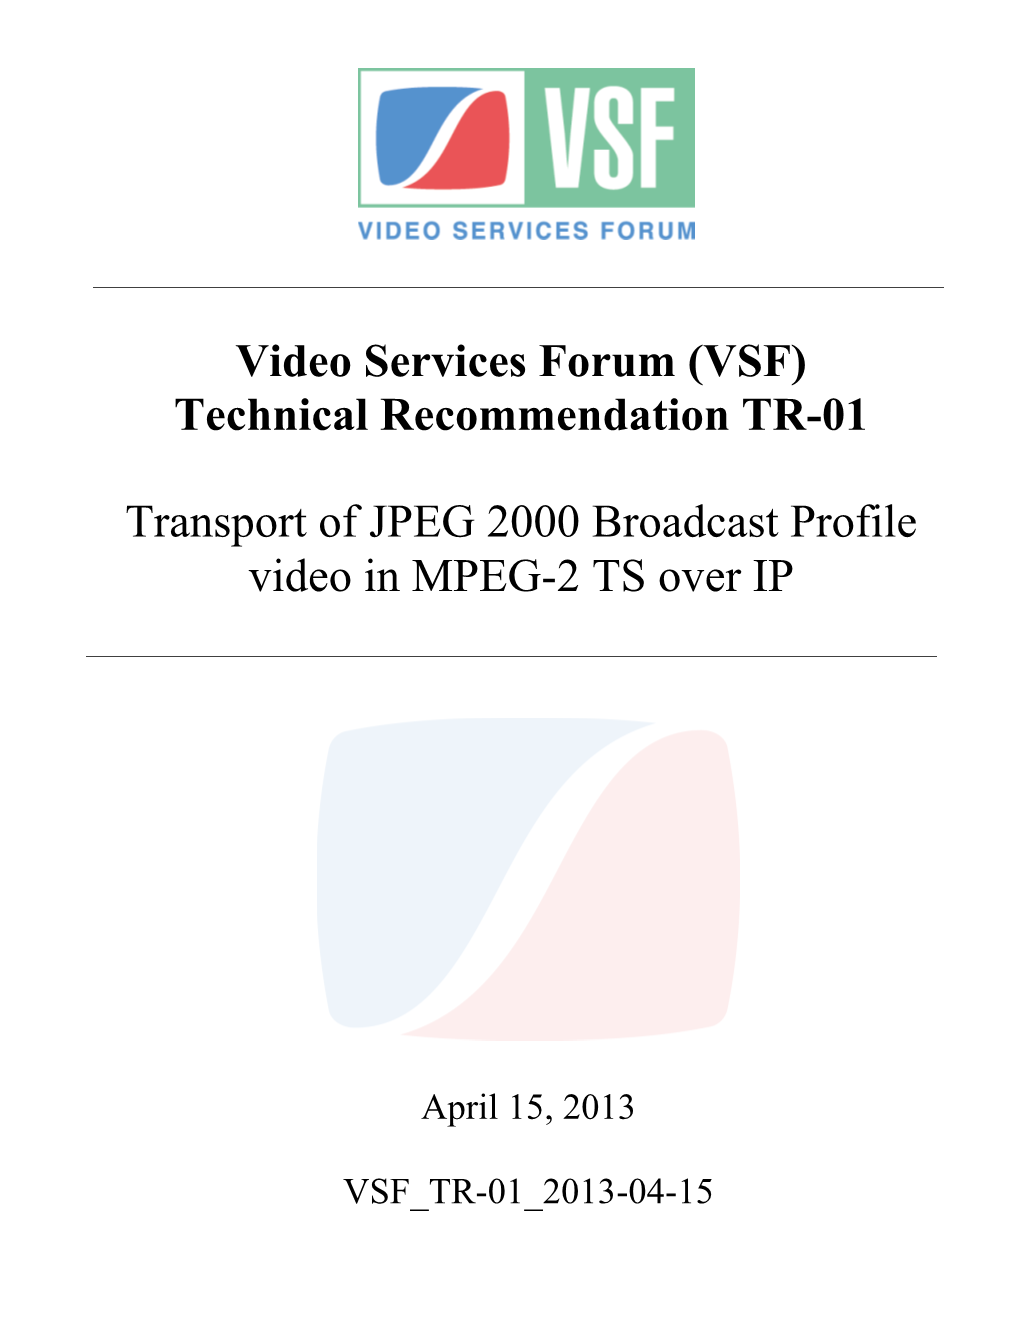 (VSF) Technical Recommendation TR-01 Transport of JPEG 2000